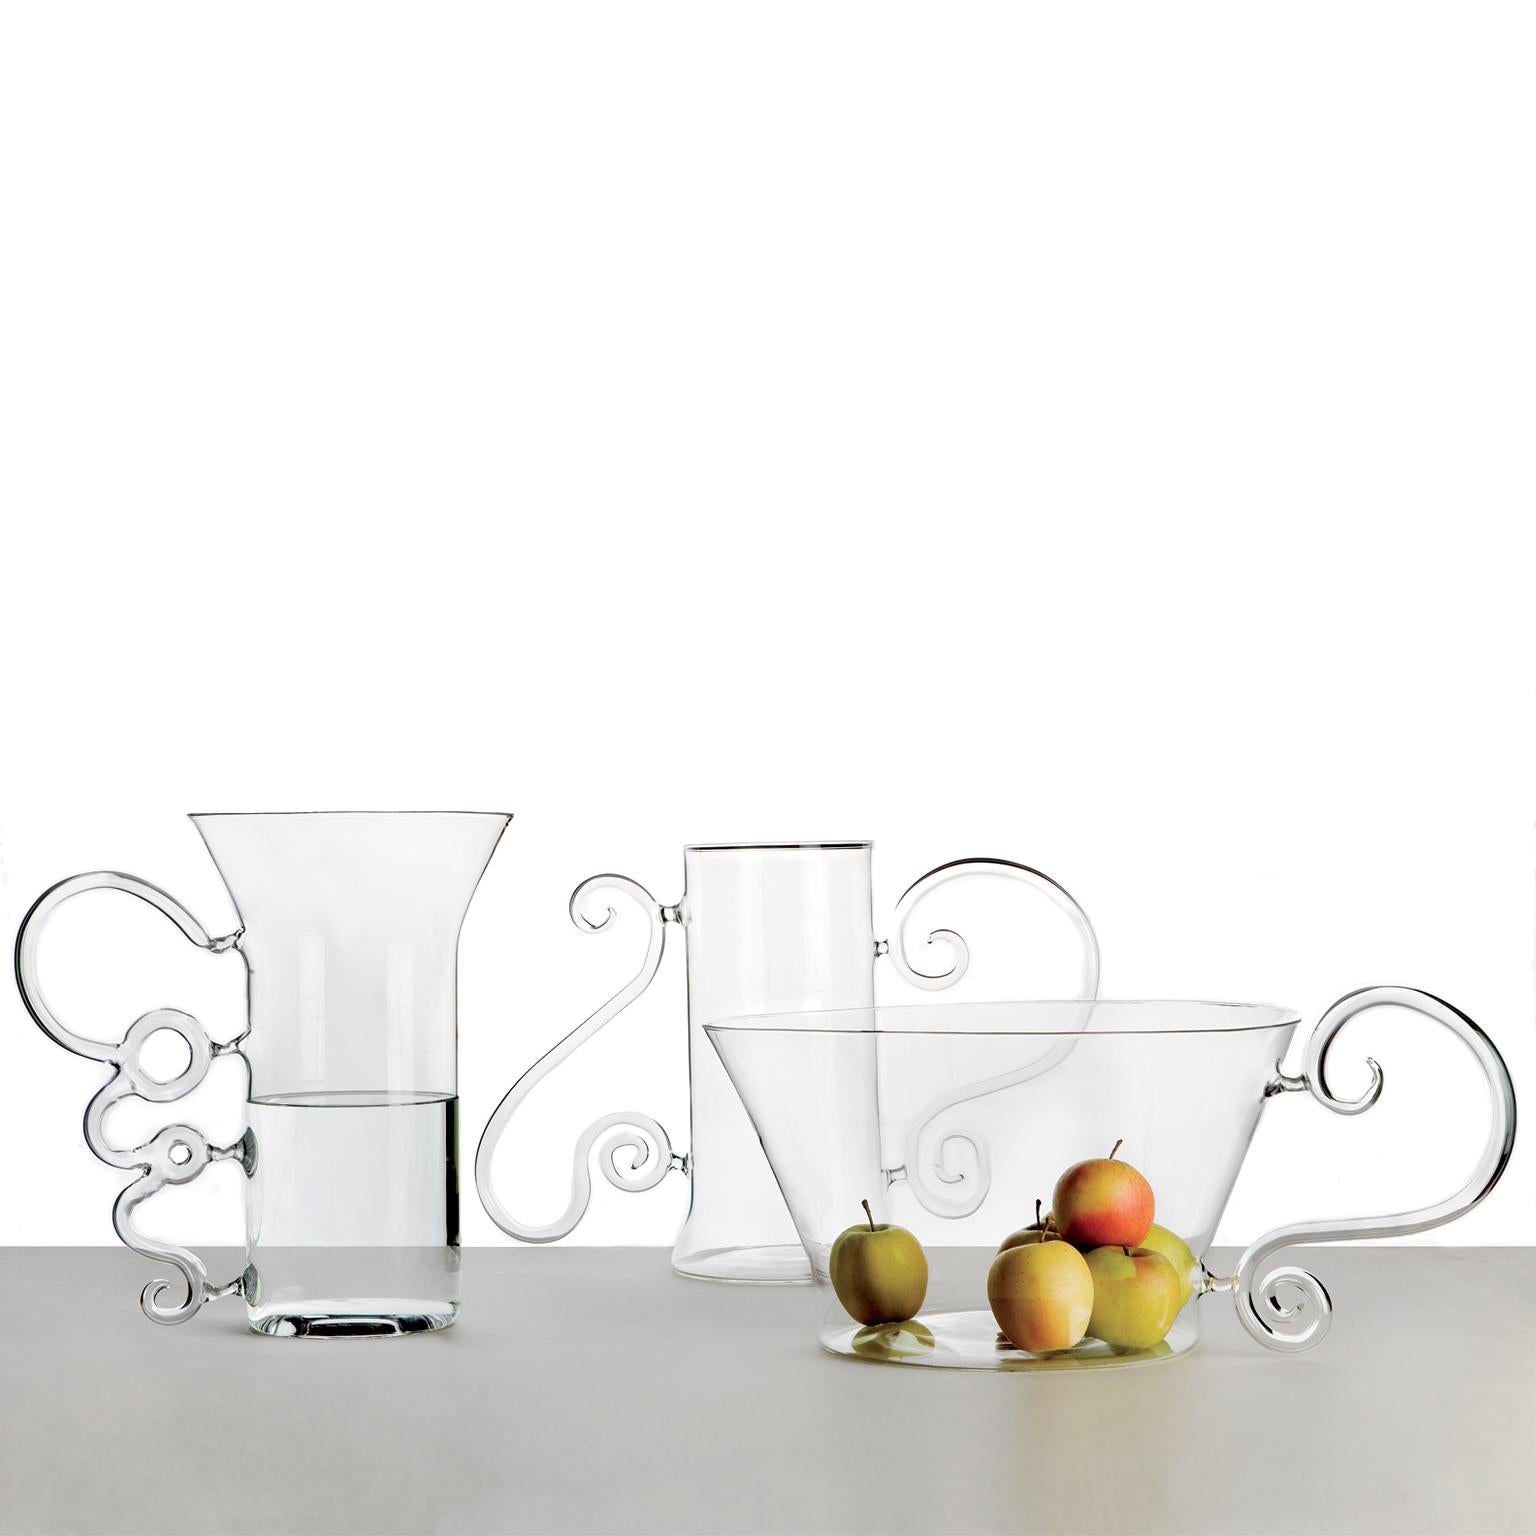 The Futiles collection has a Baroque taste with a frivolous essence. Dimensions are generous for all the pieces of the collection: a double handle vase, a giant water carafe and an impressive fruit pot, a normal carafe with a sumptuous handle. ?The